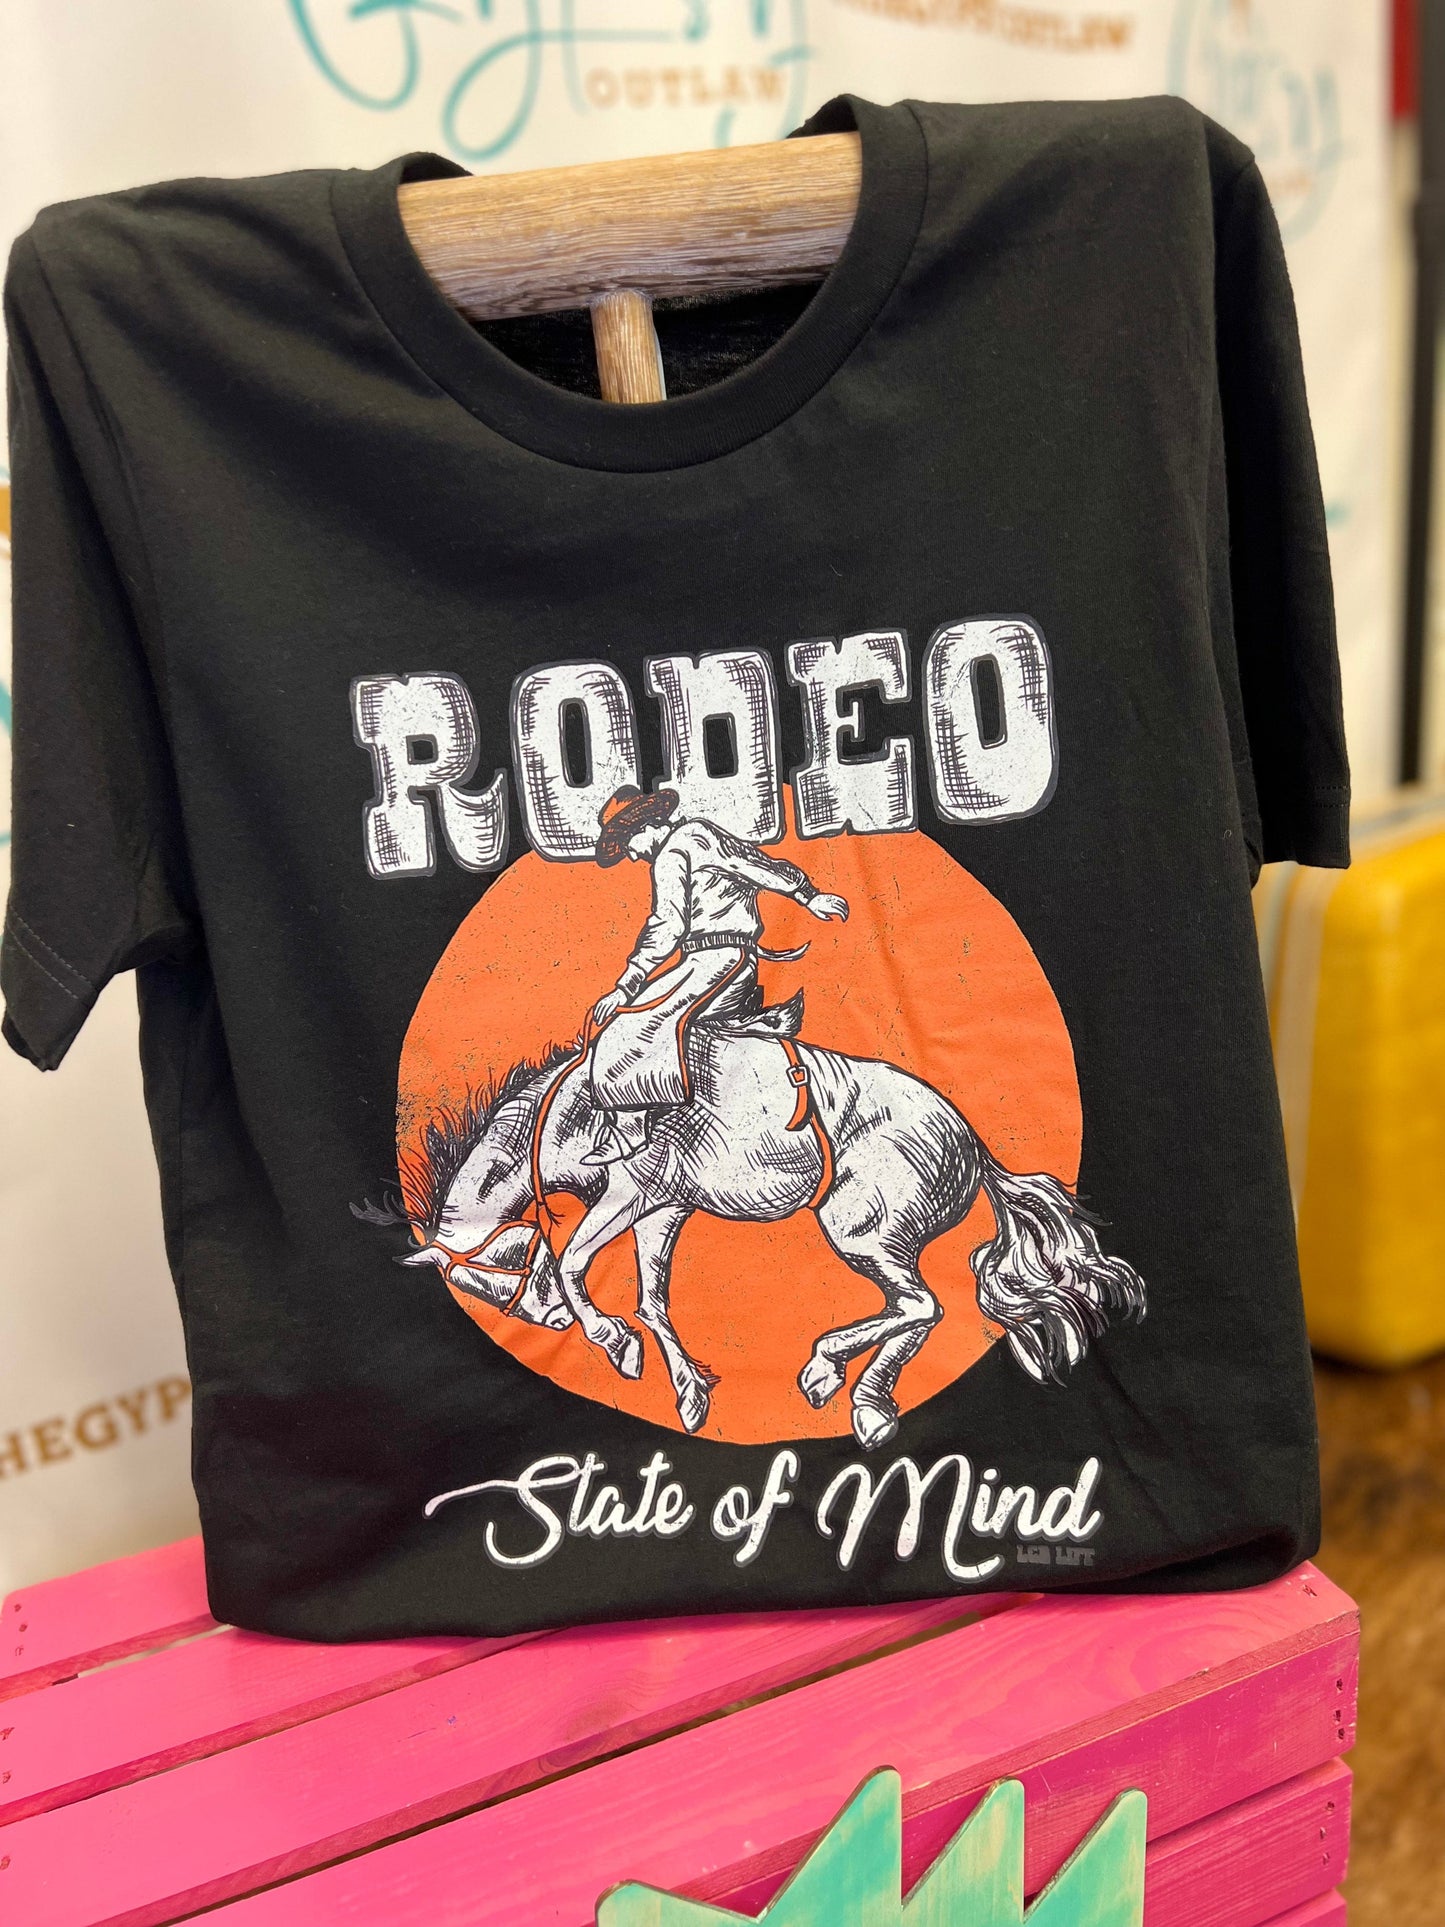 Rodeo State of Mind Tee